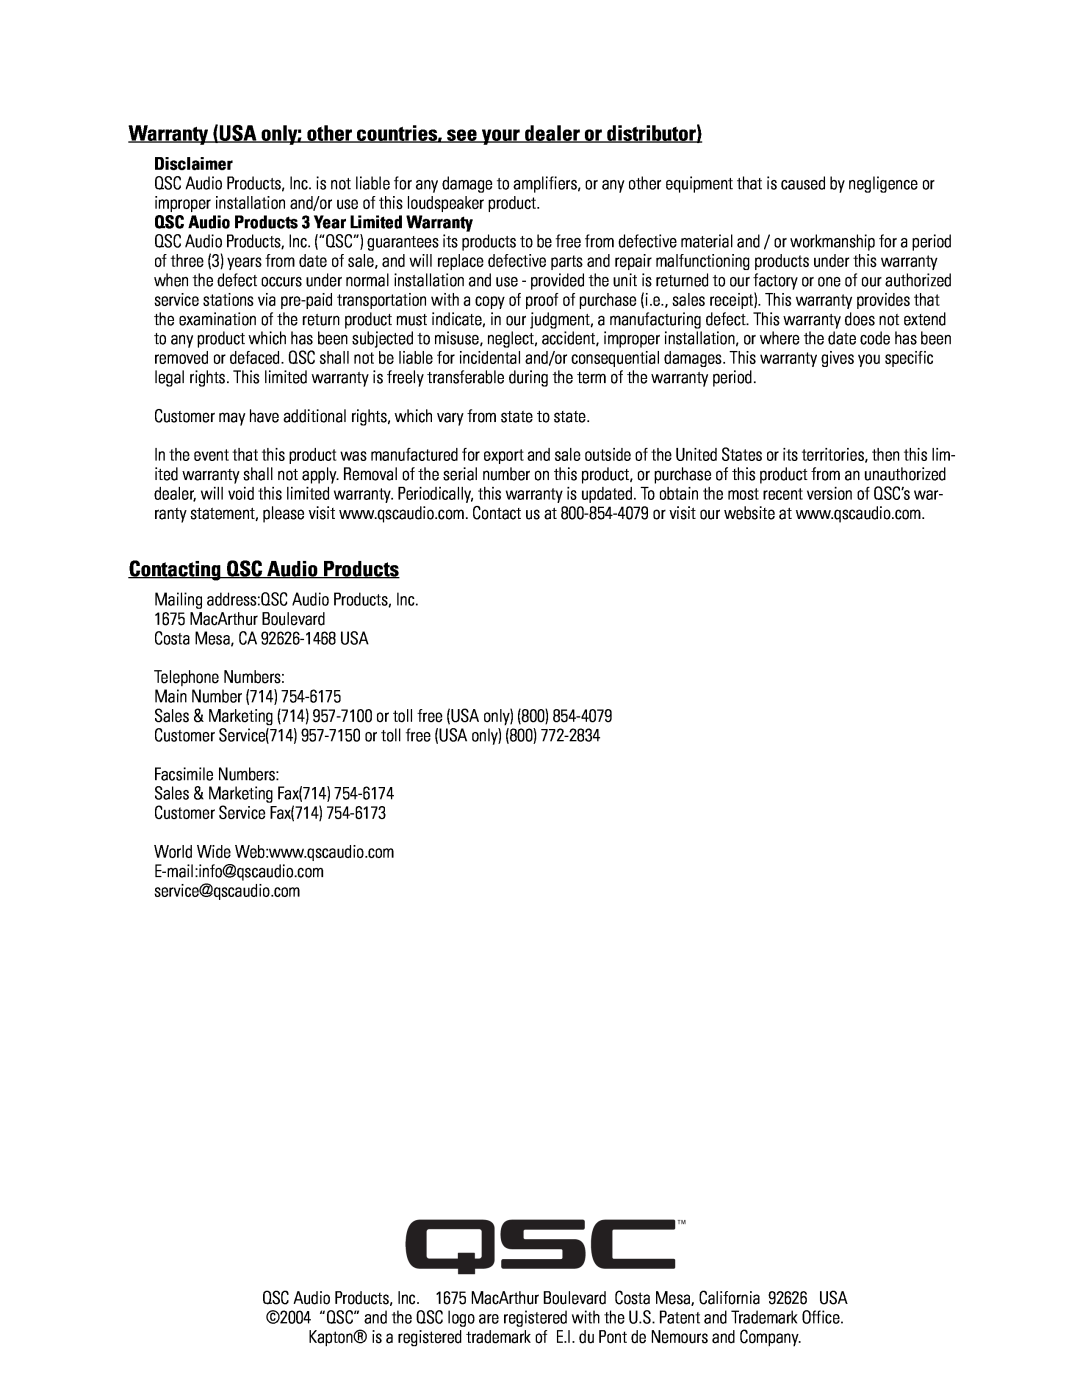 QSC Audio SC-322 specifications Contacting QSC Audio Products, Costa Mesa, CA 92626-1468USA Telephone Numbers 